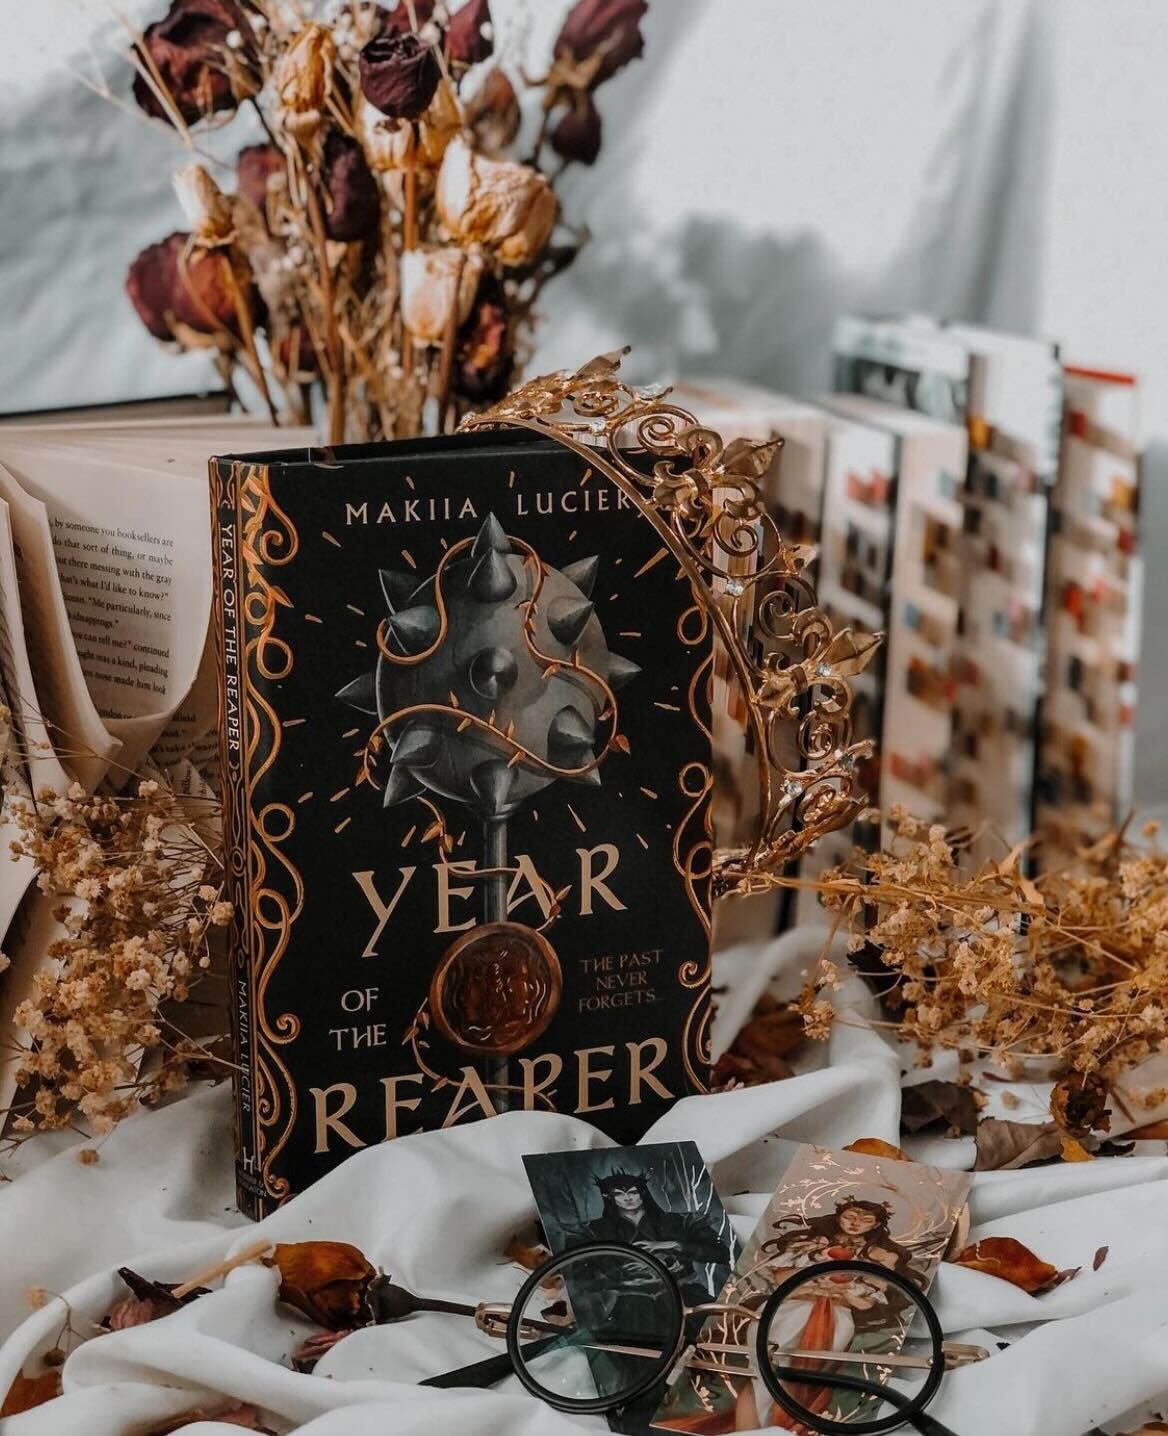 Year of the Reaper Readalong Day 5!